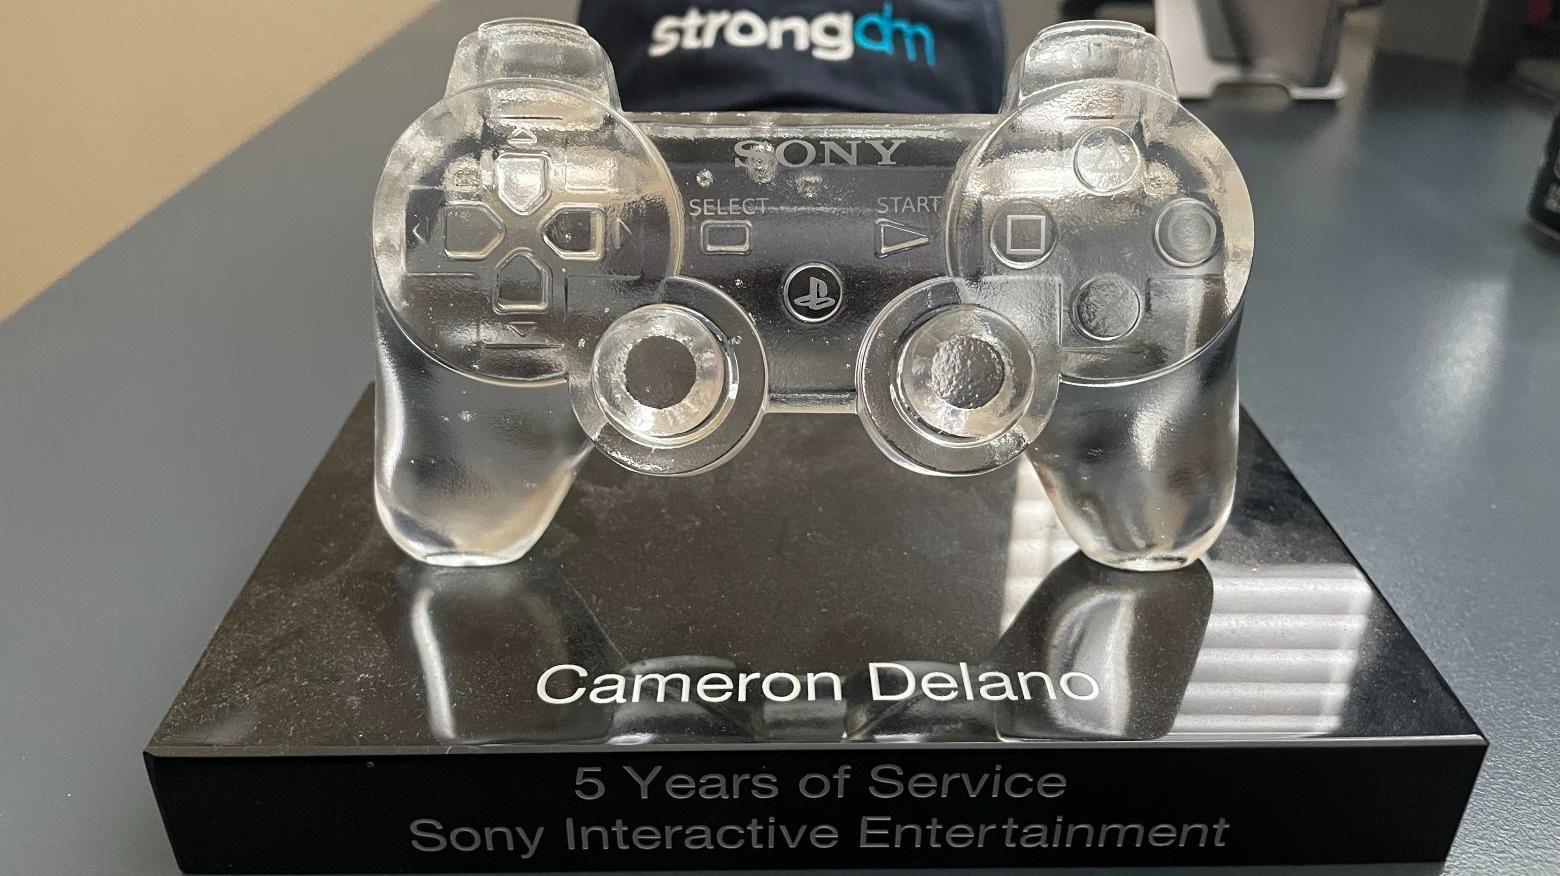 Cameron Delano, 5 Years of Service at Sony Interactive Entertainment